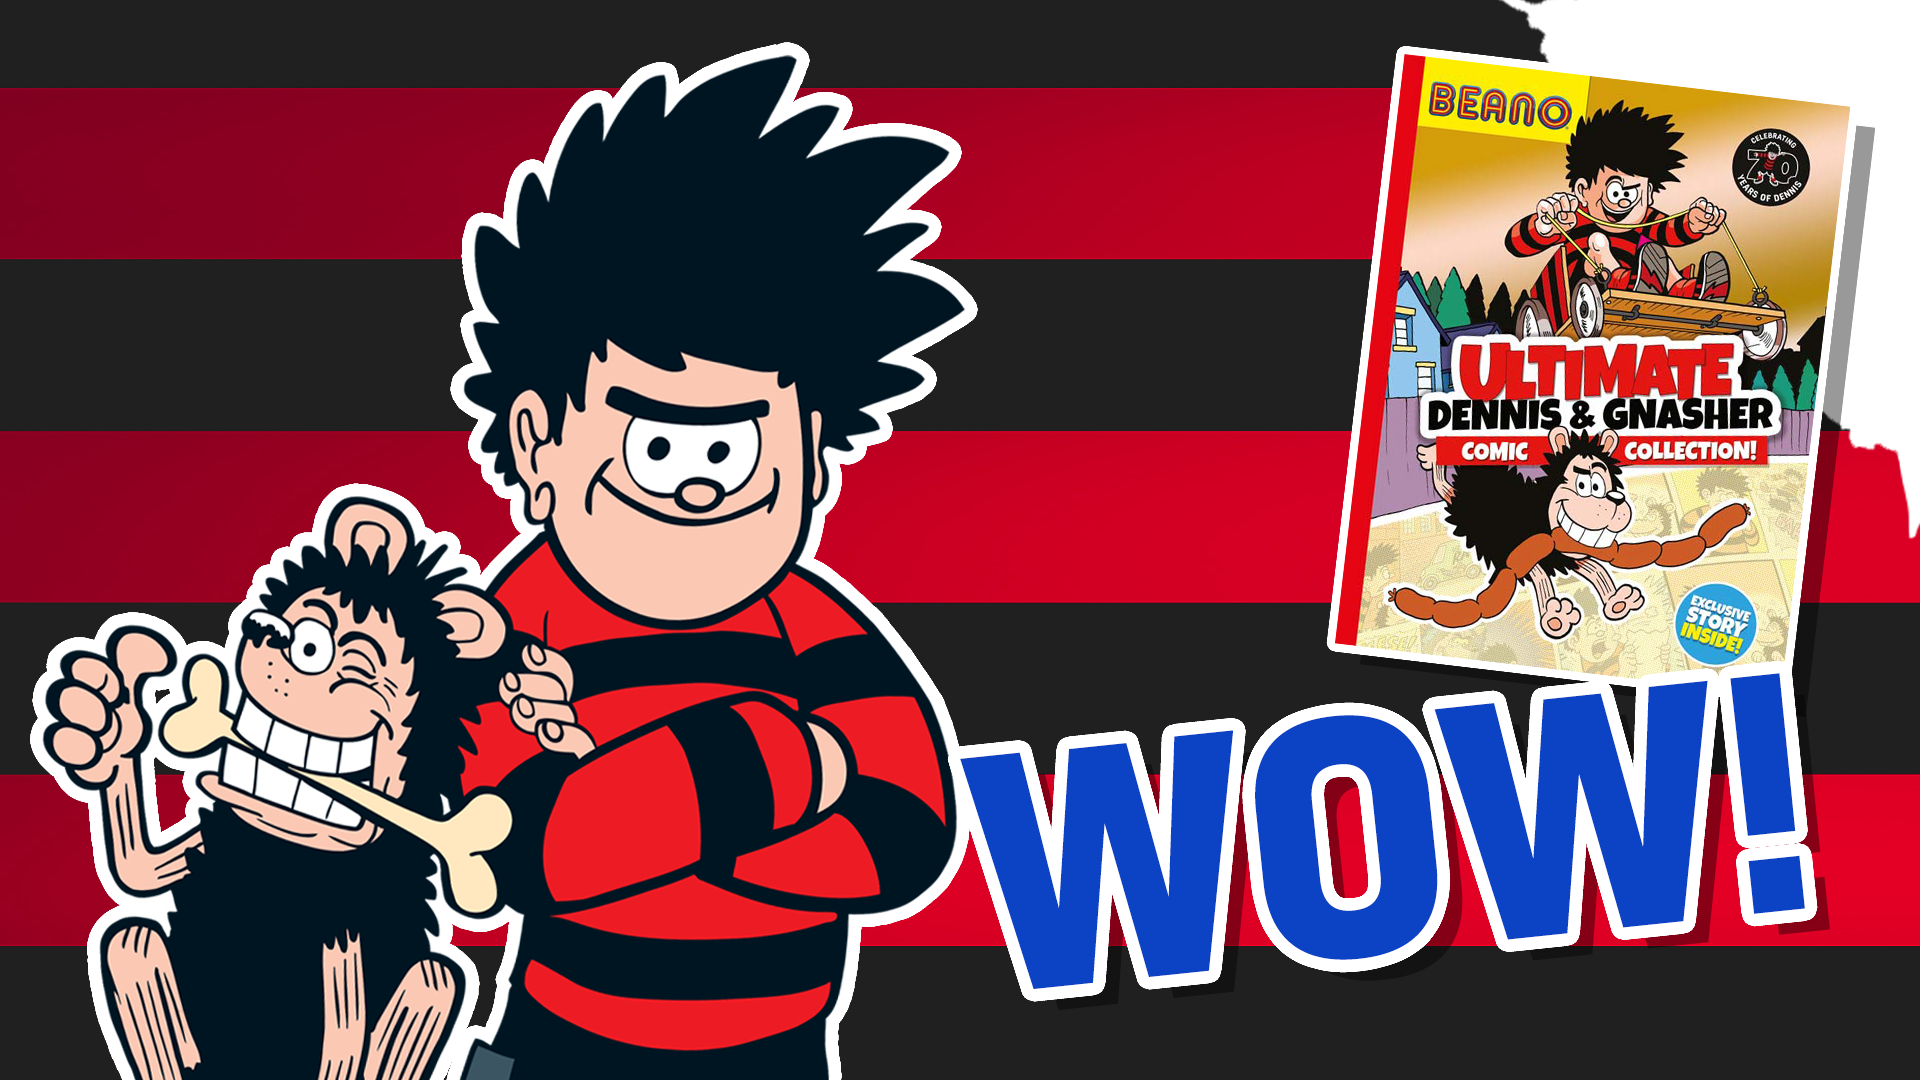 Dennis and Gnasher quiz result: Wow